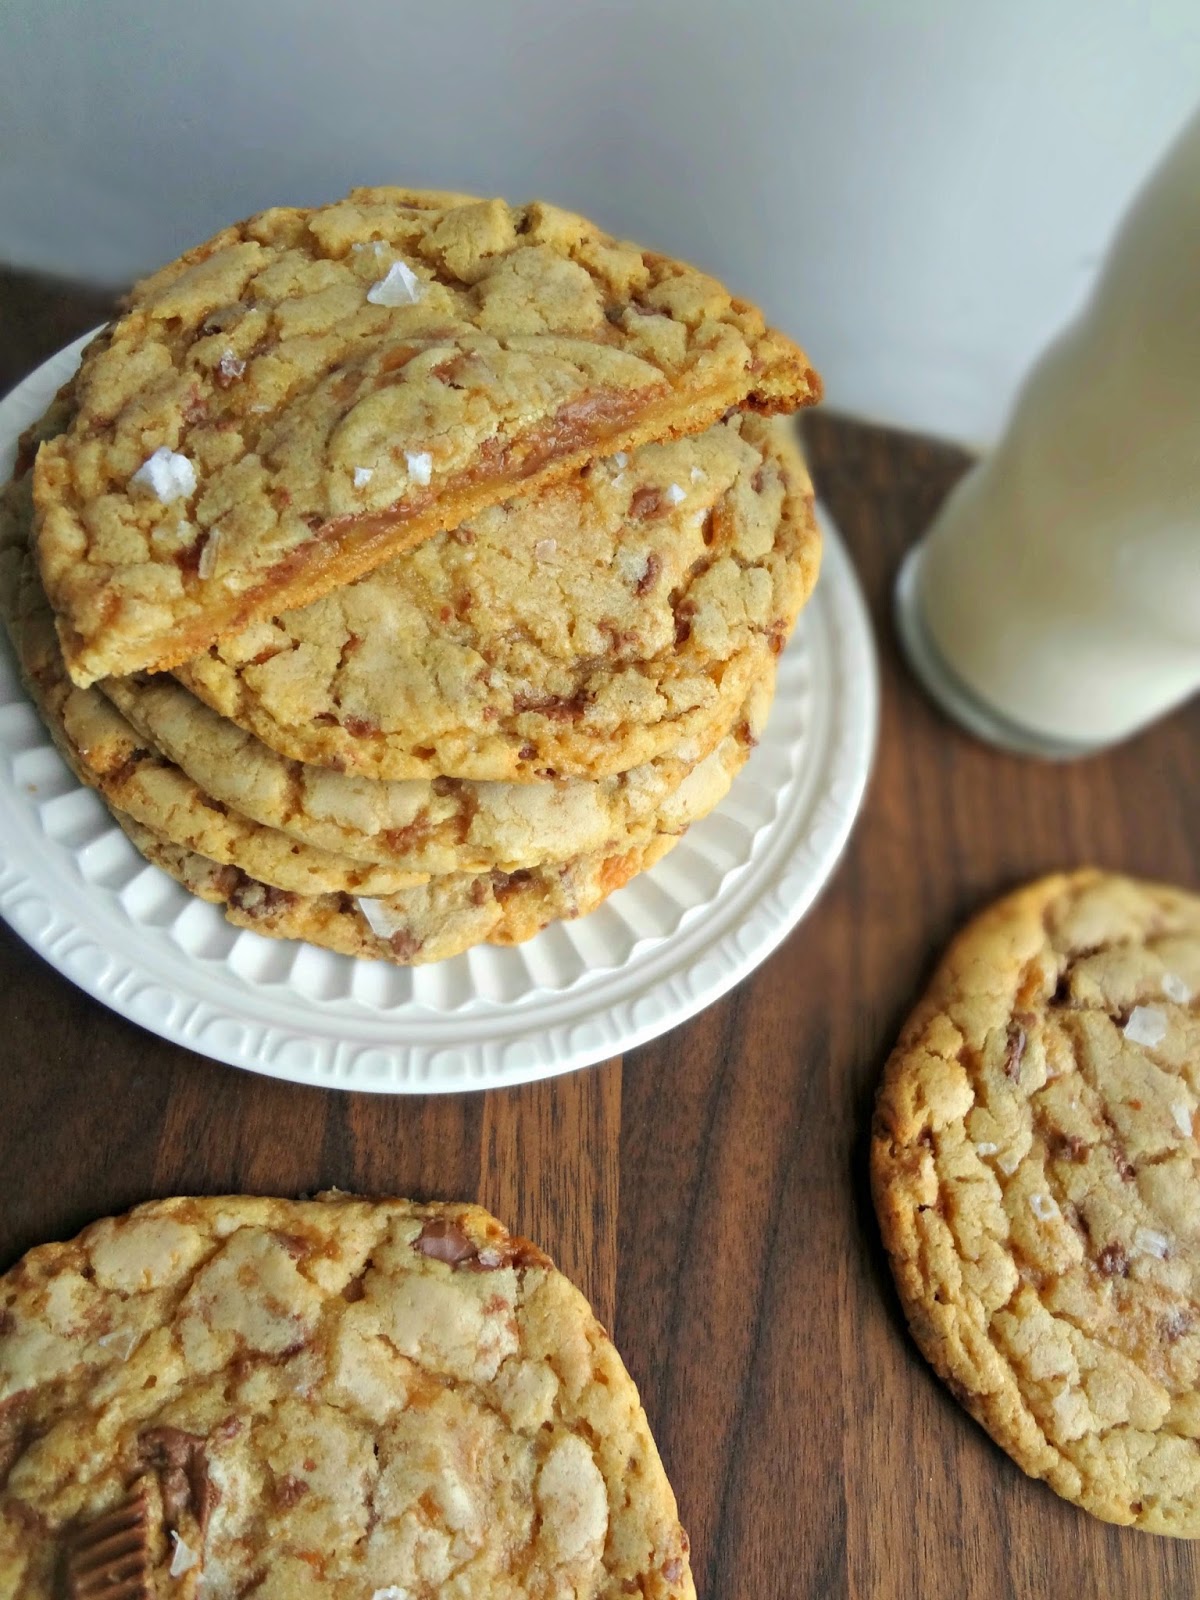 Browned Butter Peanut Butter Cup Crunch Cookies with Sea Salt